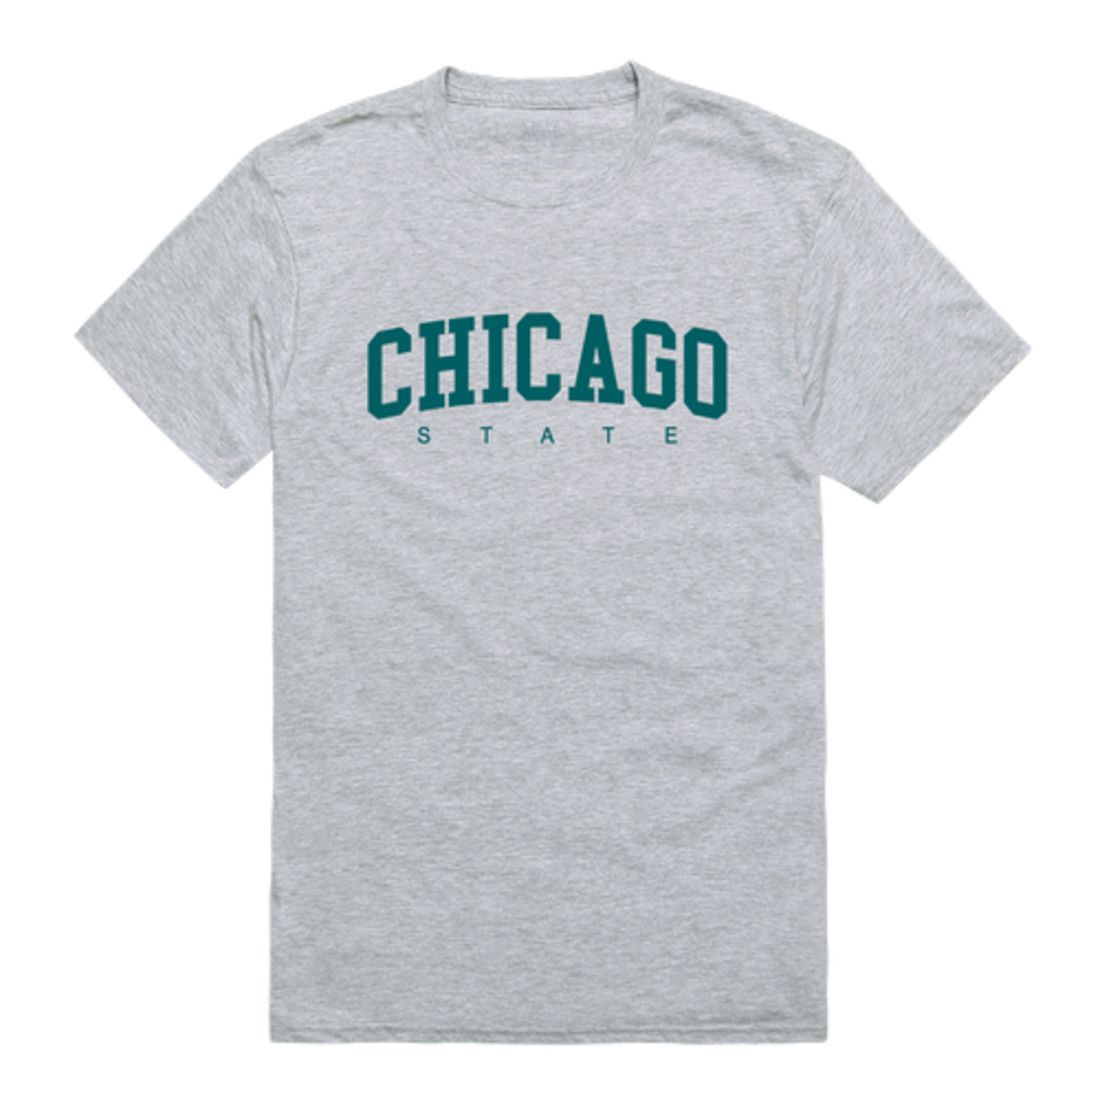 Chicago State University Cougars Game Day T-Shirt Tee